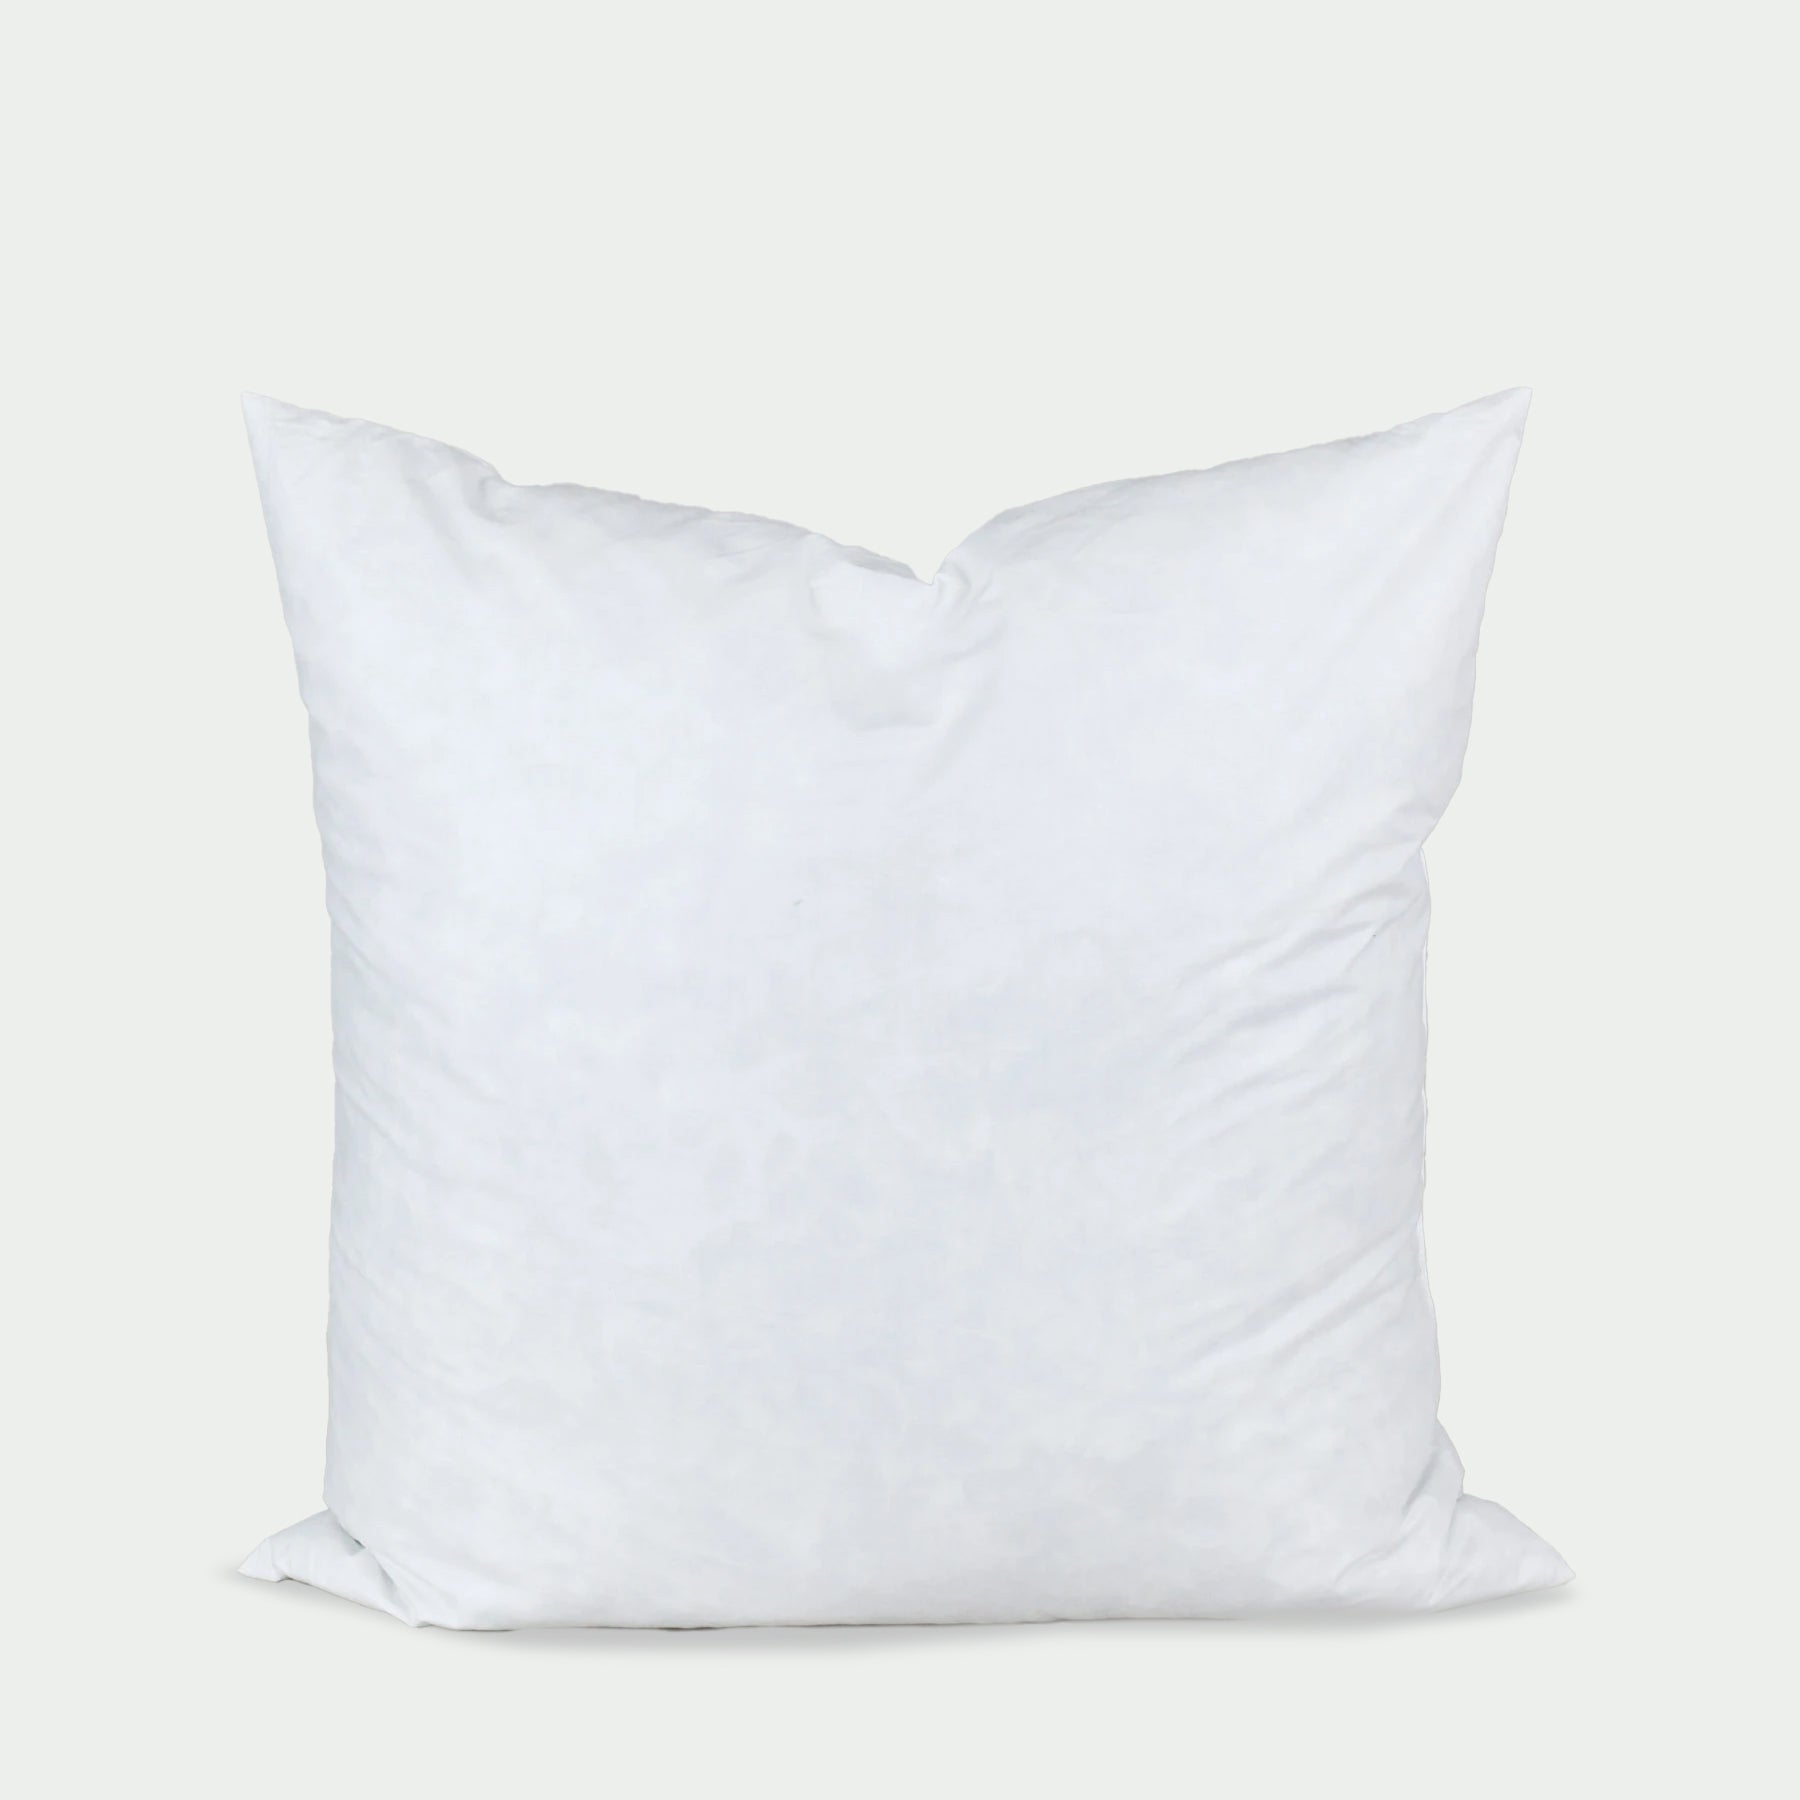 Down etc. 235tc Cotton-Covered Rectangle Pillow Insert Filled with Feathers and Down - 14 x 20, White